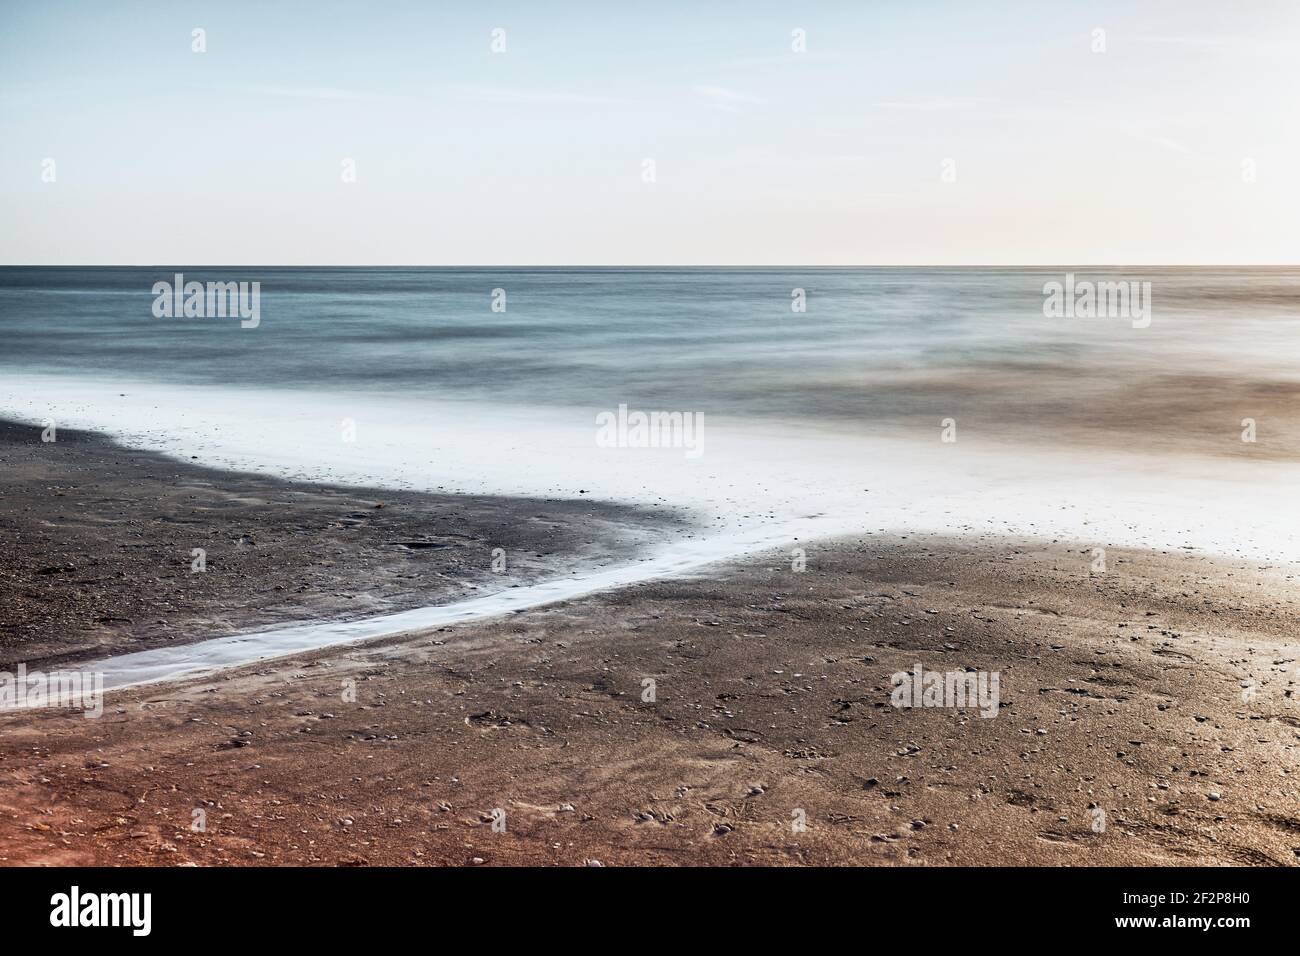 Long exposure of the surf at the ocean in Florida at sunset Stock Photo